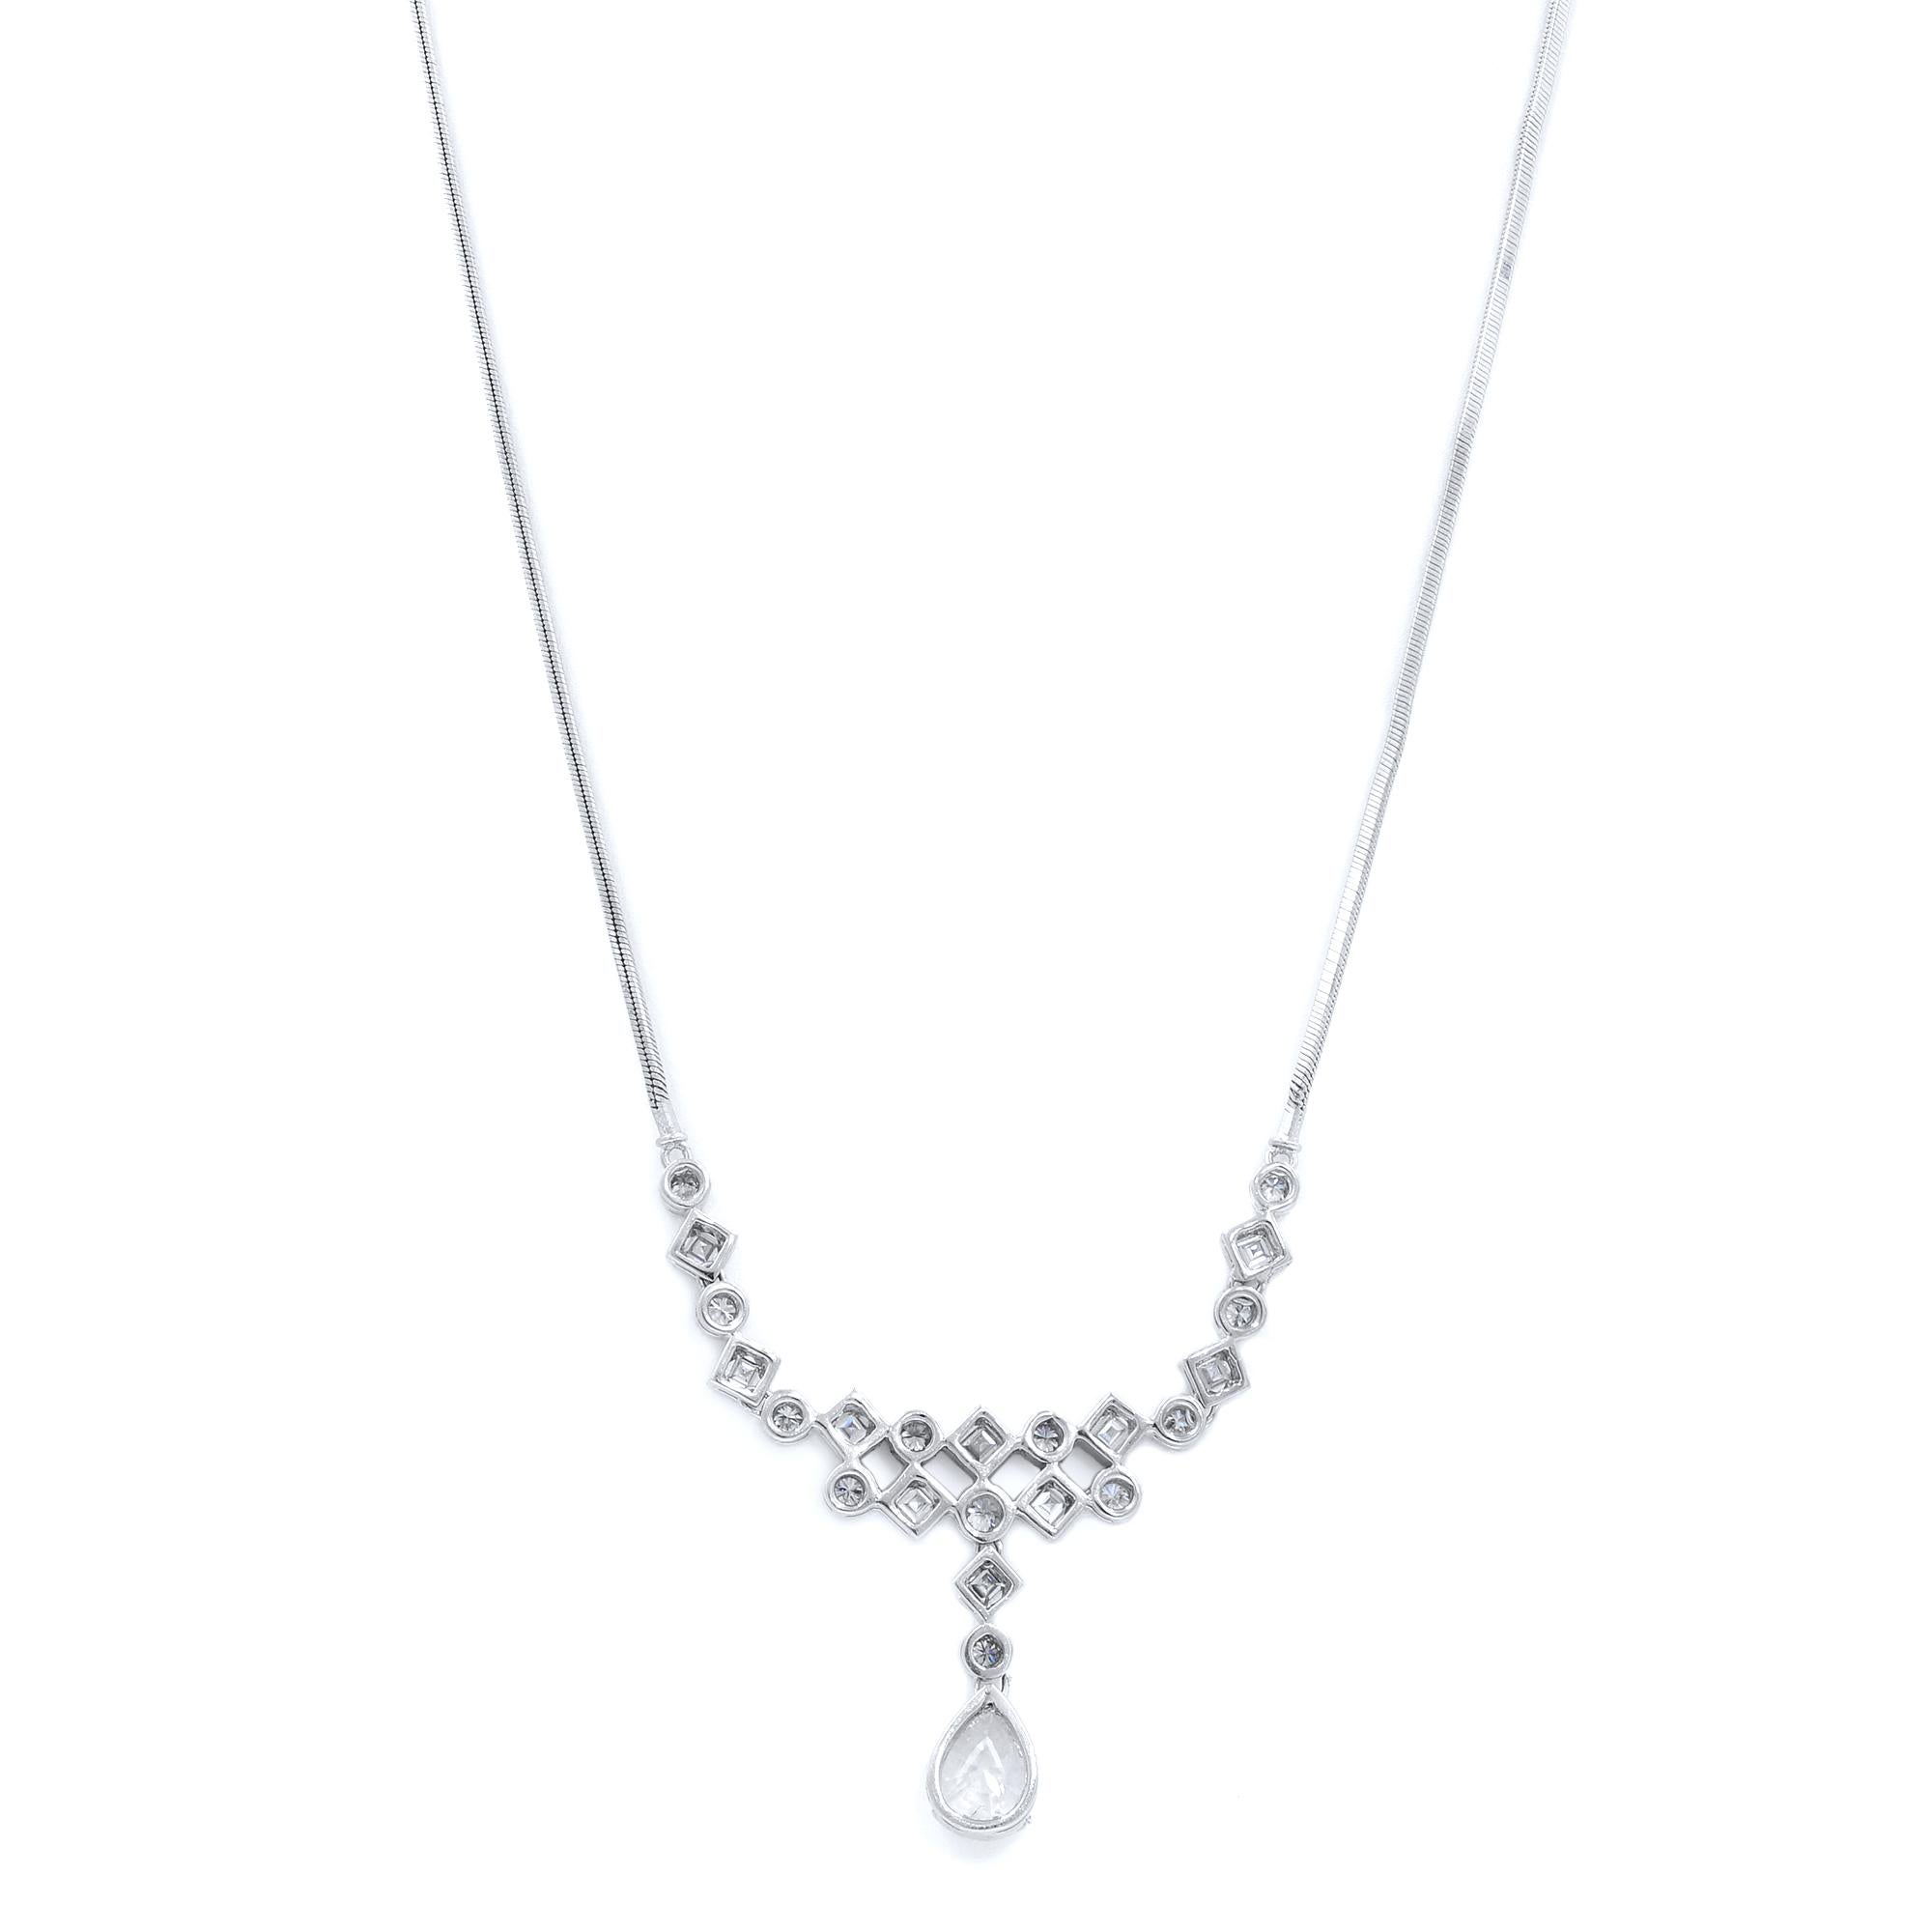 This beautiful necklace is encrusted with vintage cut pear, round and carre shape diamonds crafted in 18K white gold. Center pear shaped diamond weighs 1.20 carats with an open culet that looks great and makes a statement while round and carre shape